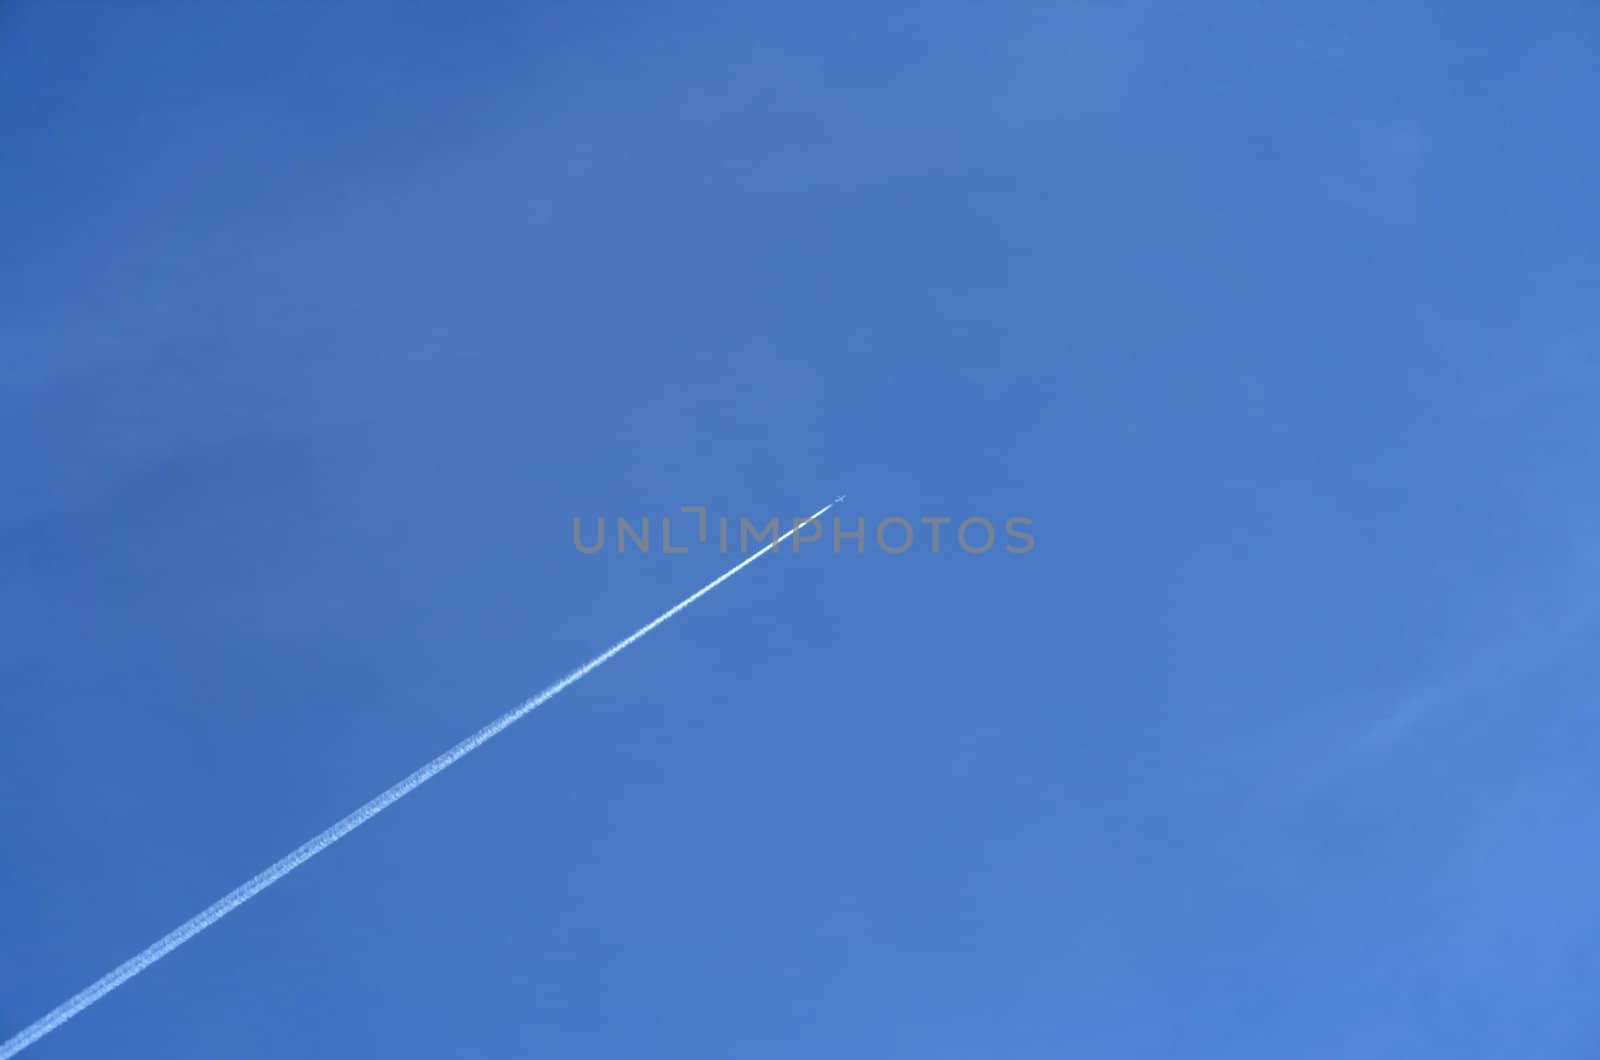 Trace of a jet airplane going up in the blue sky.